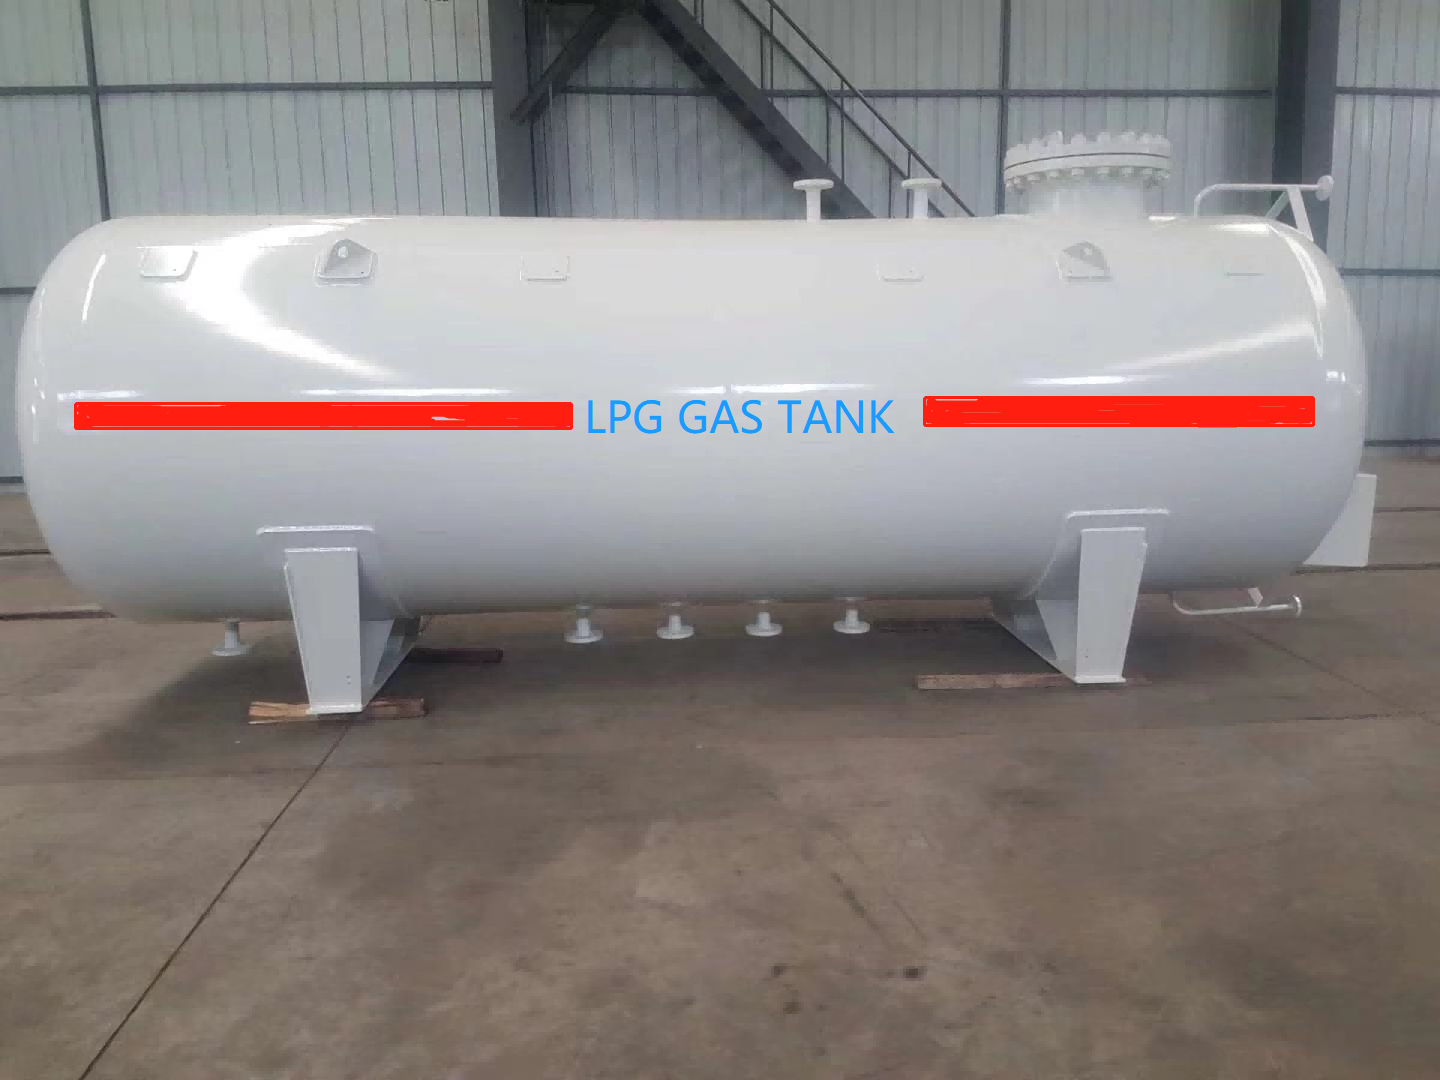 Hazards and risks of exceeding the filling factor of LPG storage tanks